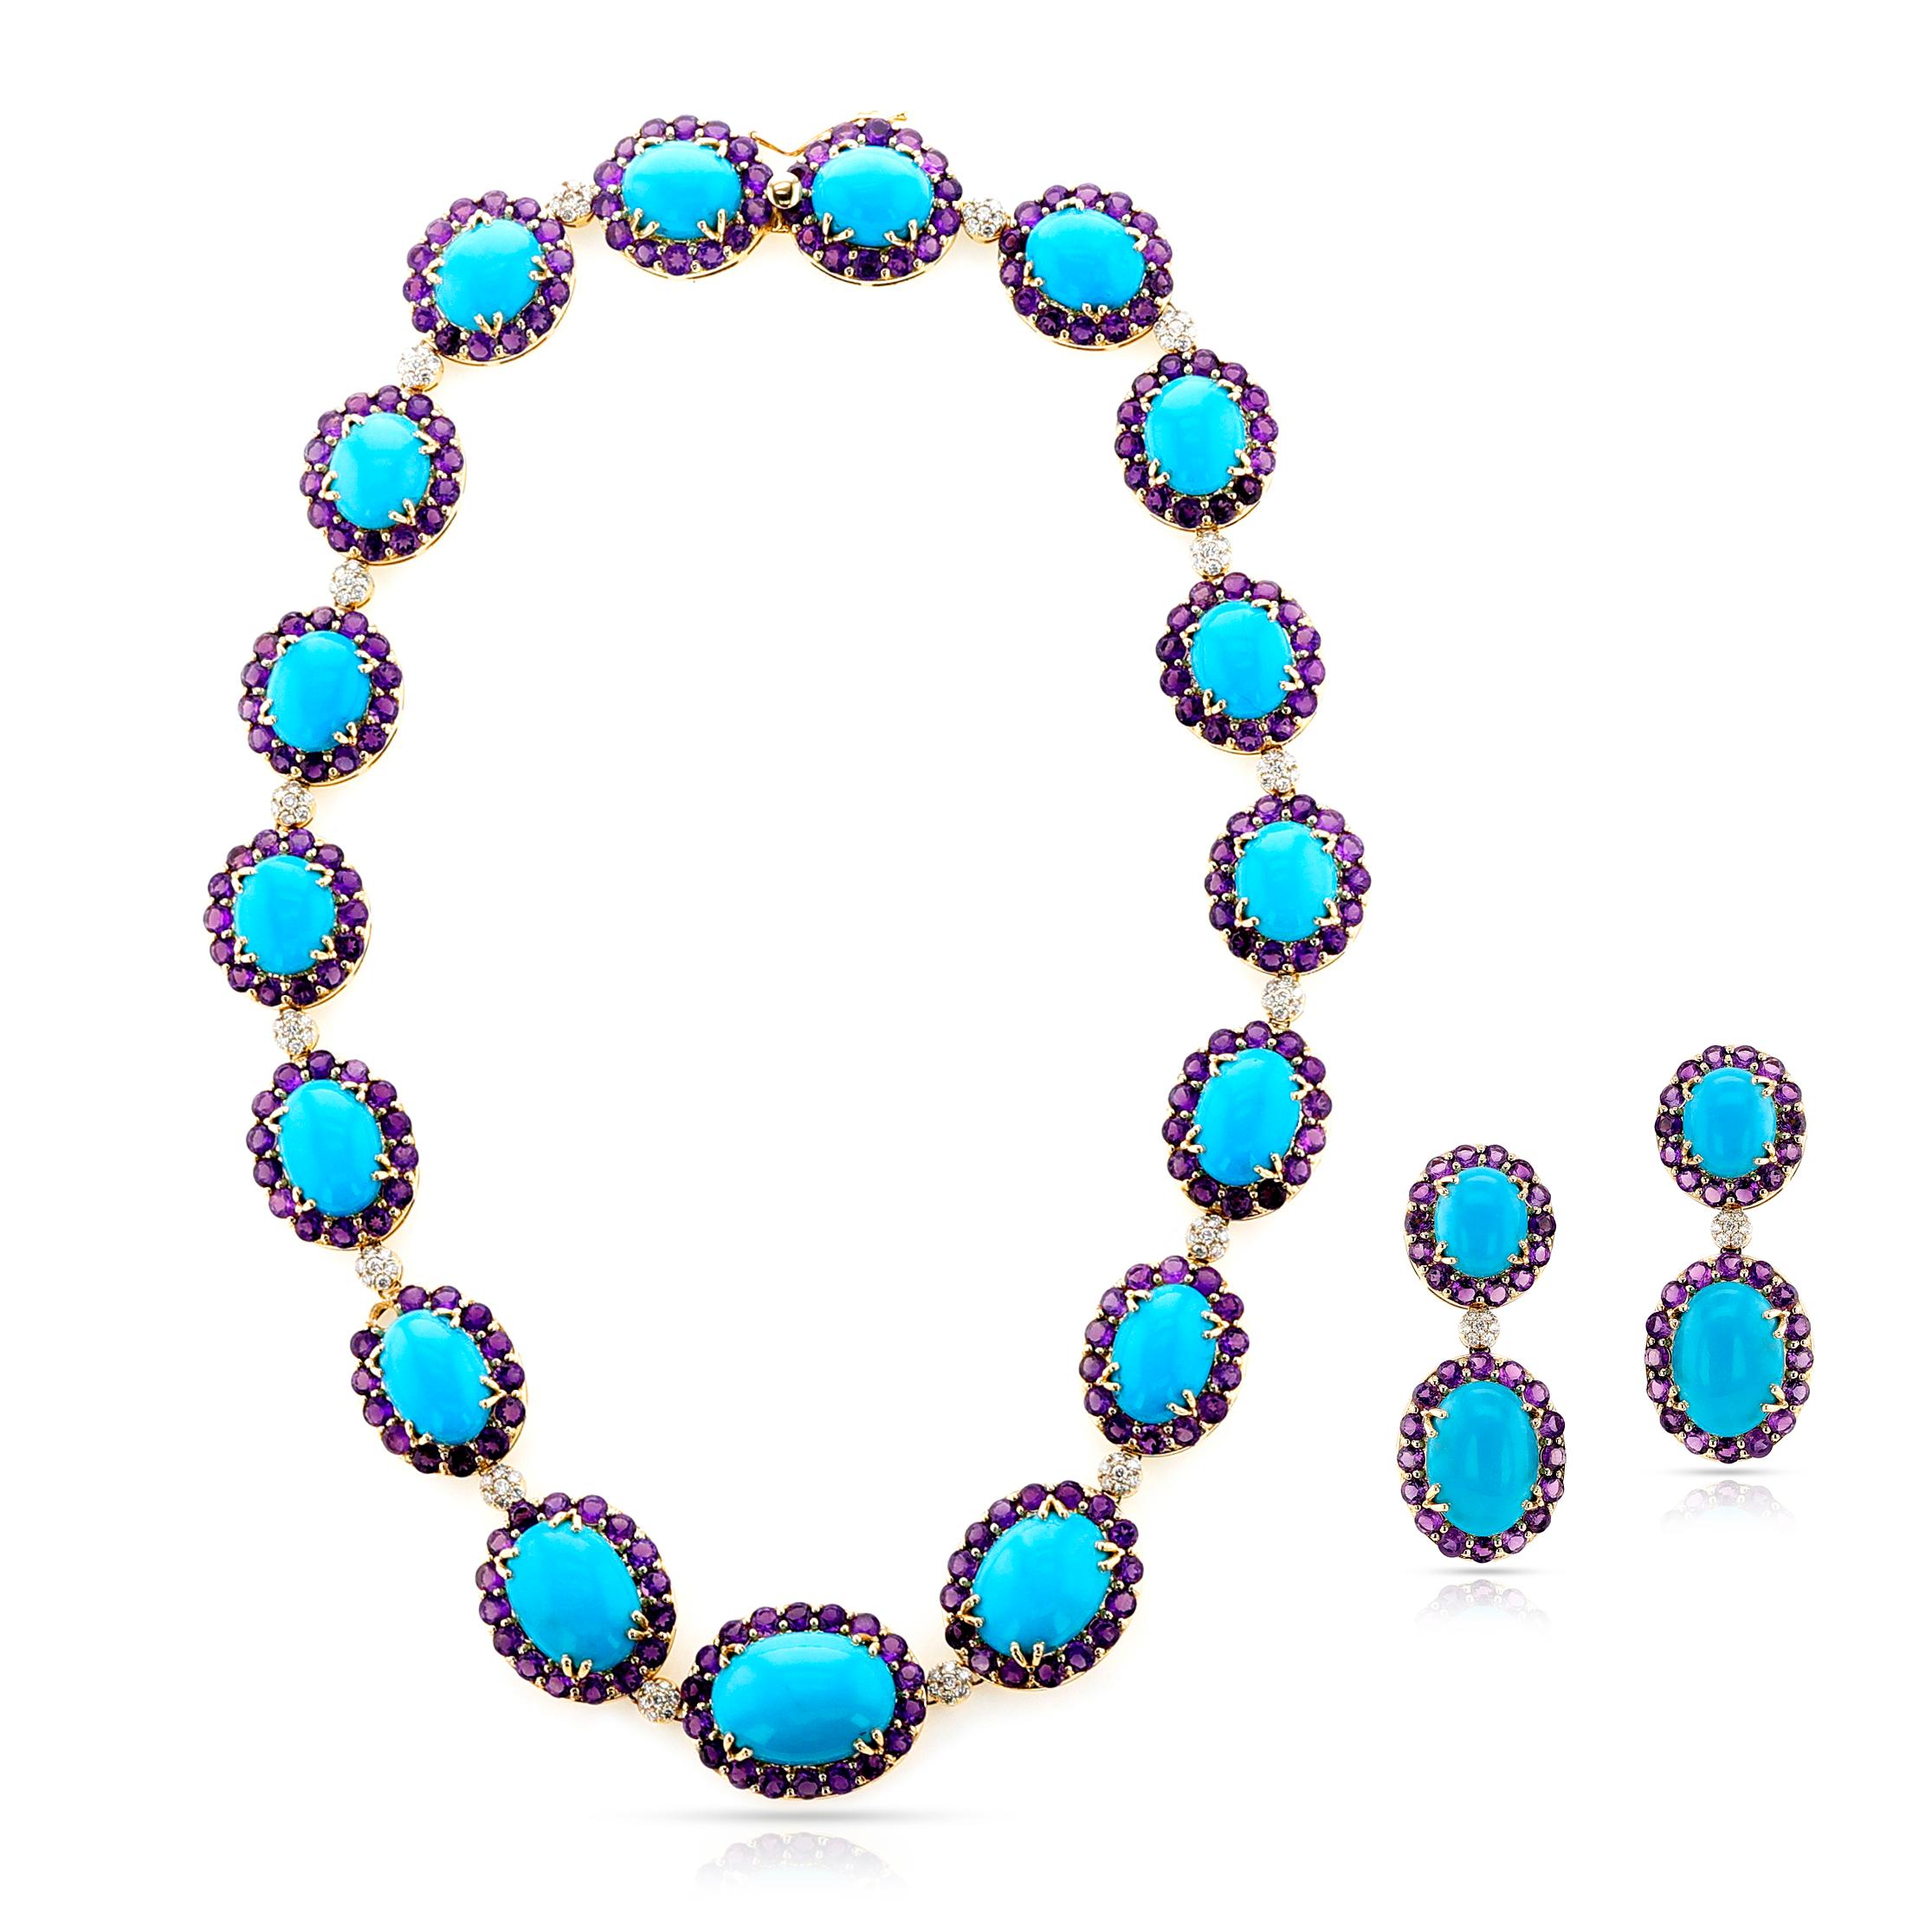 A 18k Turquoise, Amethyst and Diamond Necklace and Earring Set. 

Necklace: 64.28 grams
Earrings: 16.80 grams
Total Weight: 80.99 grams

Turquoise: 104.55 carats
Amethyst: 31.85 carats
Diamond: 1.86 carats

Necklace Length: 
Earring Length: 